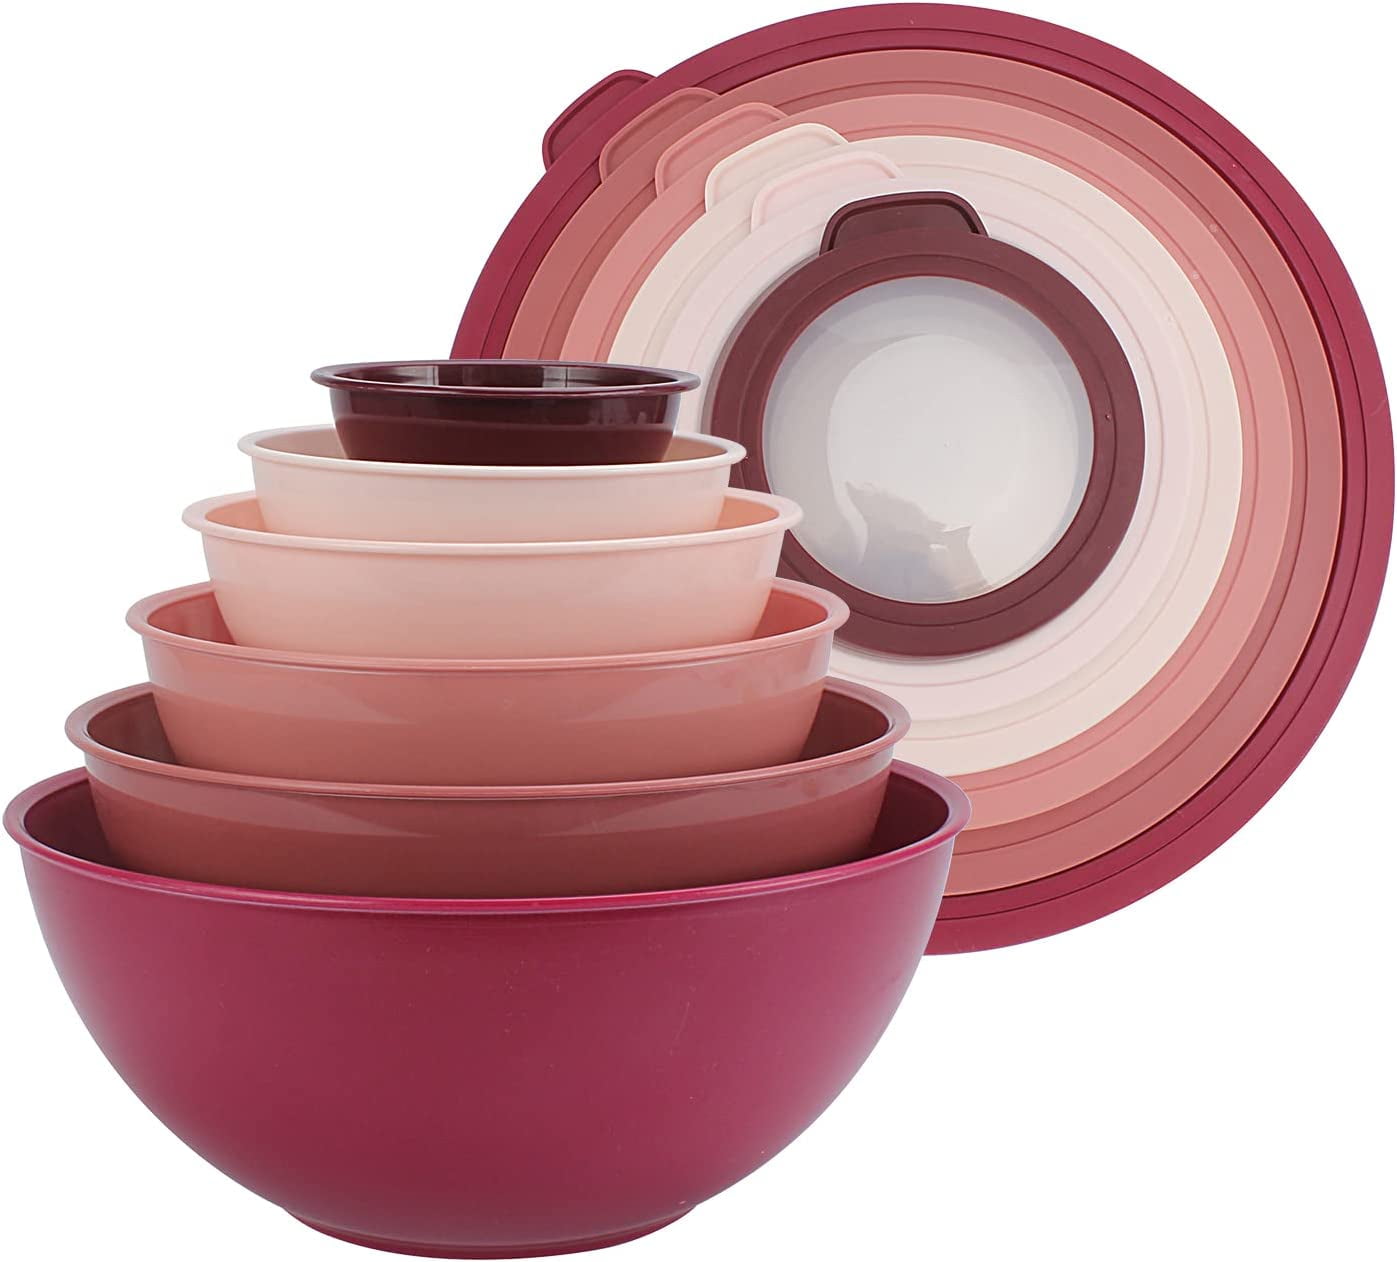 Elite Gourmet EBS-0012 12-Piece Stainless Steel Interior Colored Stackable Nesting Mixing Bowls with Airtight Lids (Set of 6) Space Saving Food